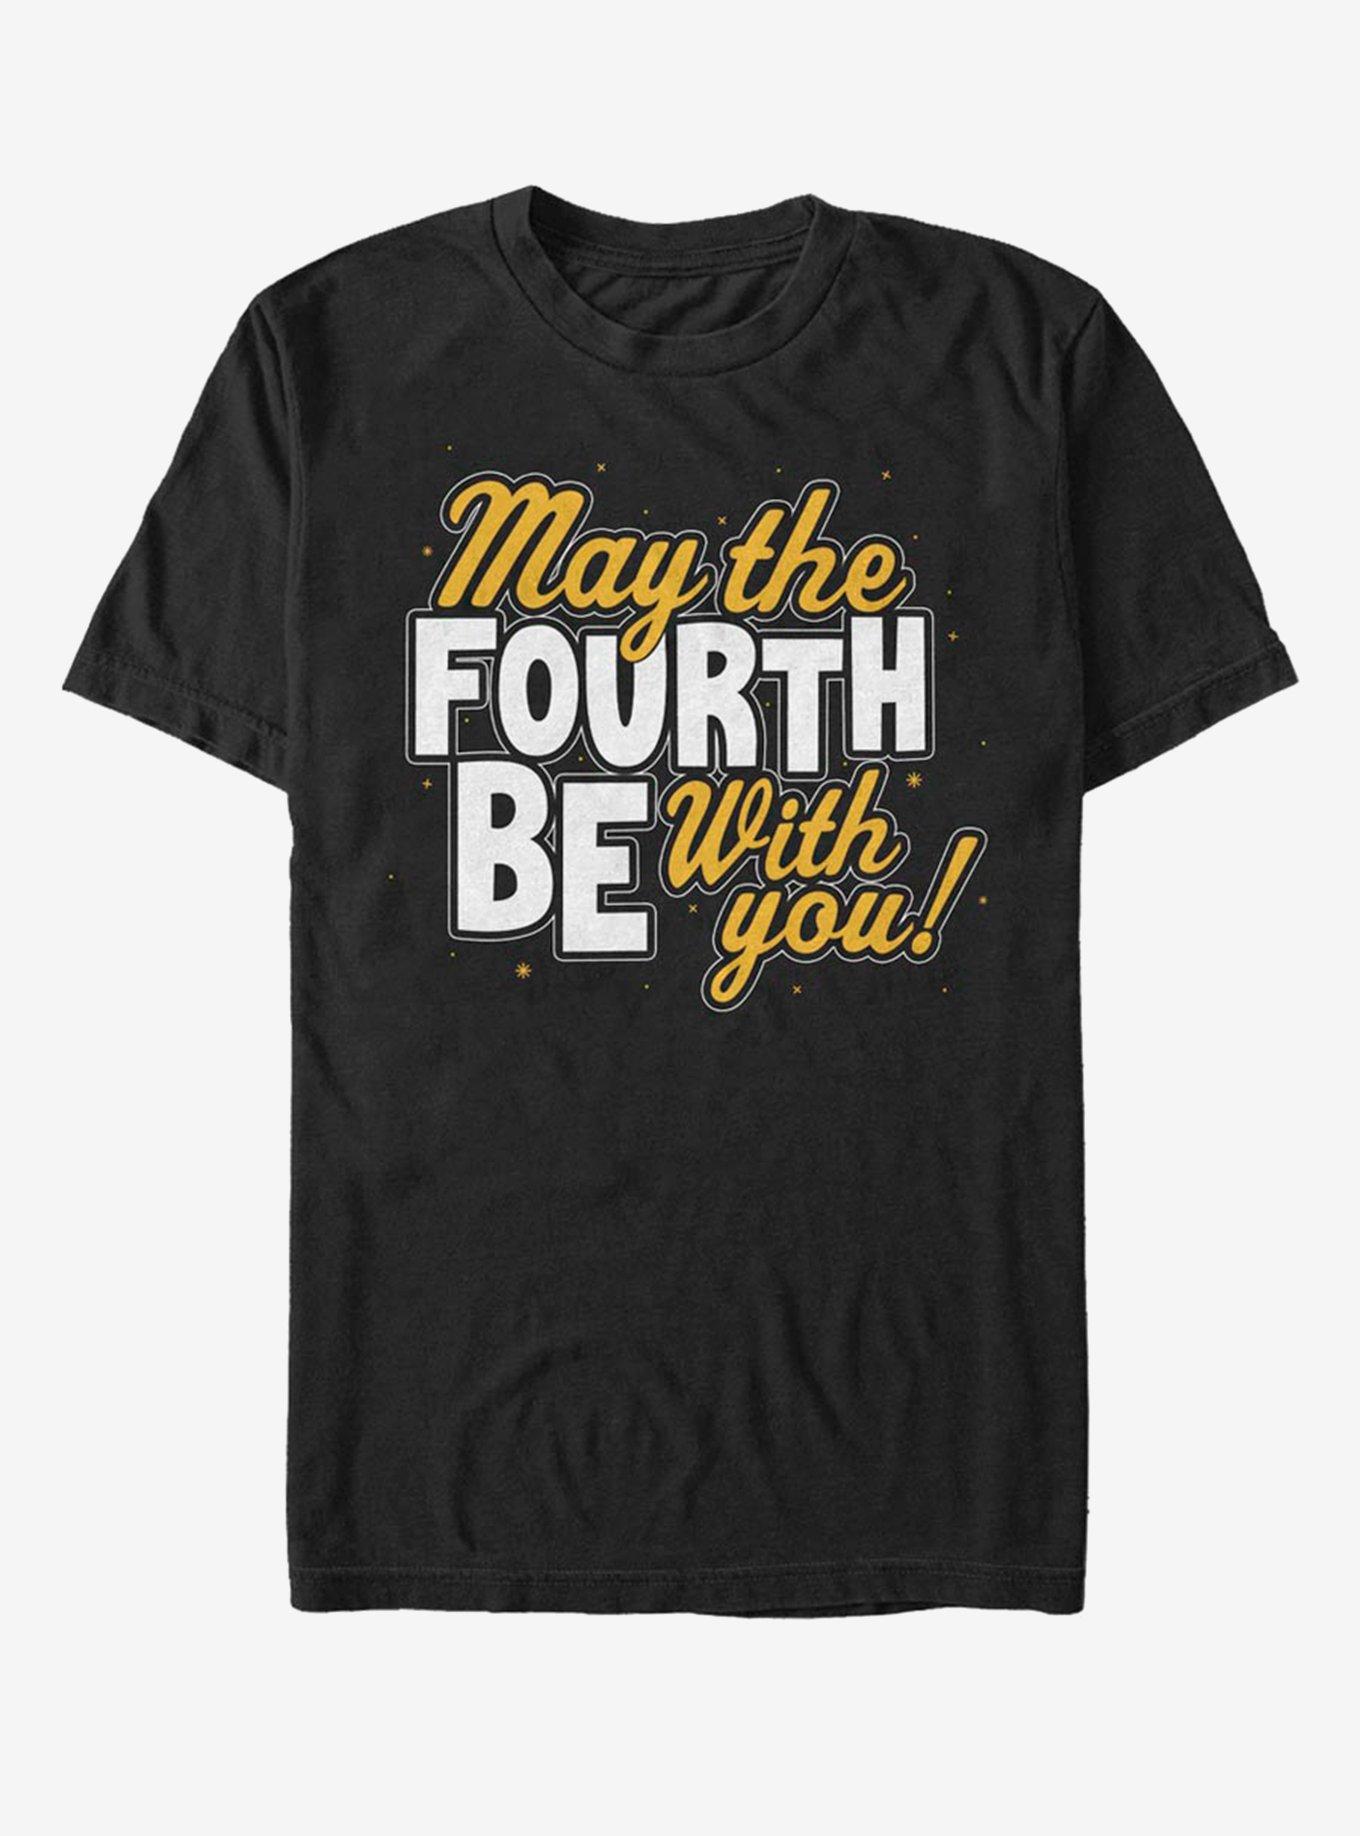 Star Wars May The Fourth Be With You Script T-Shirt, BLACK, hi-res